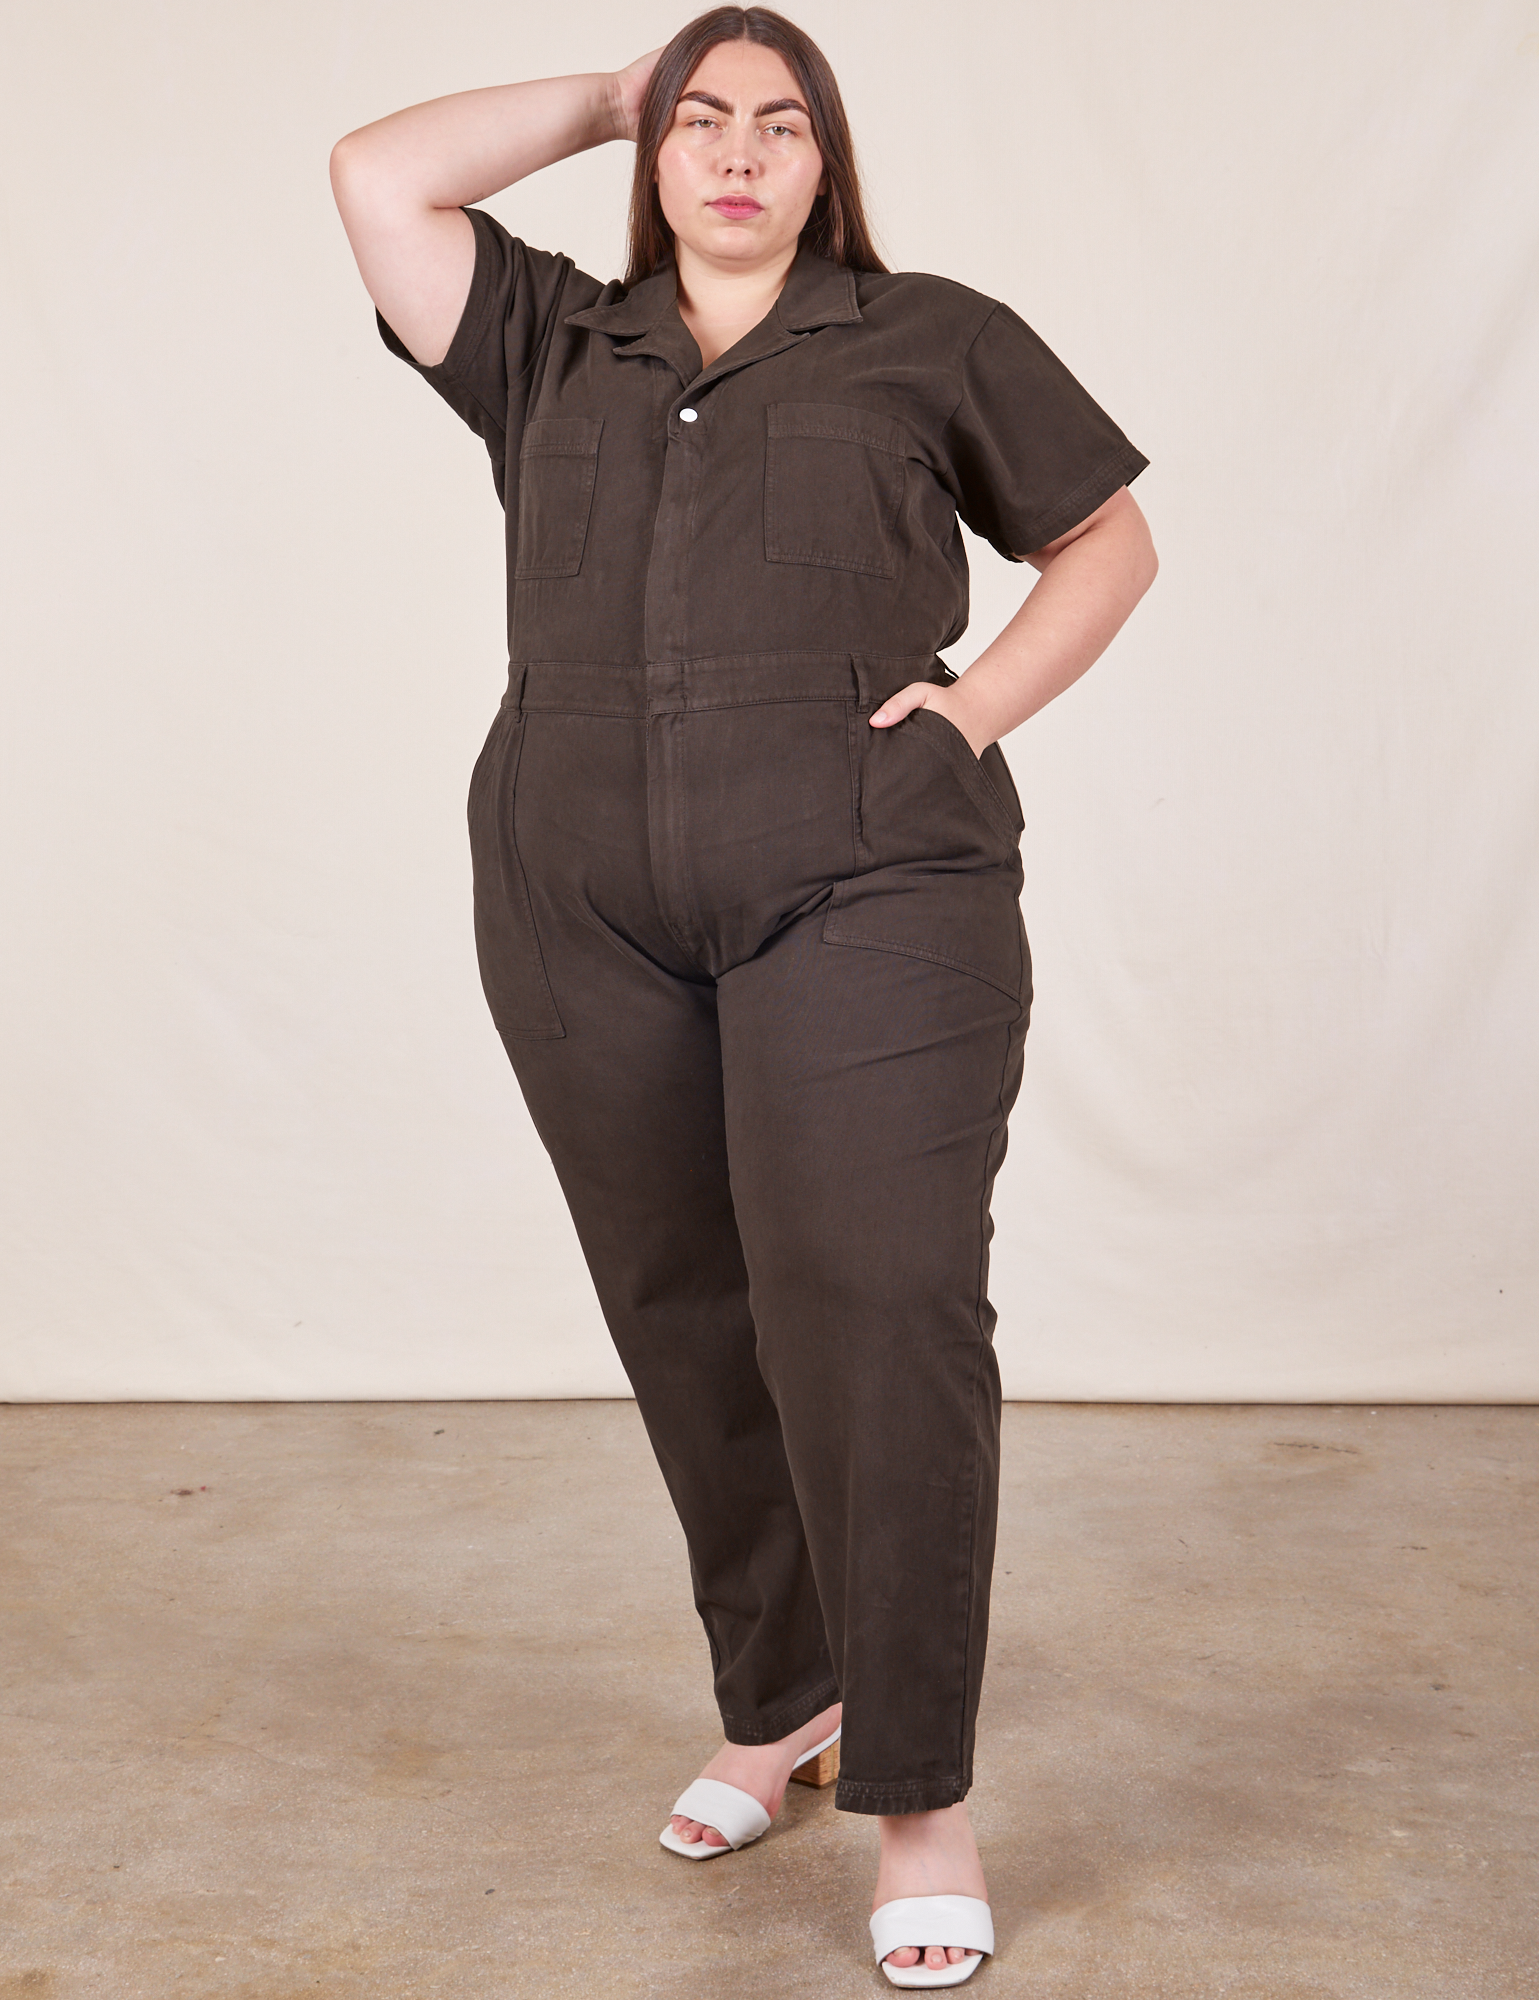 Marielena is 5’8” and wearing 2XL Short Sleeve Jumpsuit in Espresso Brown 